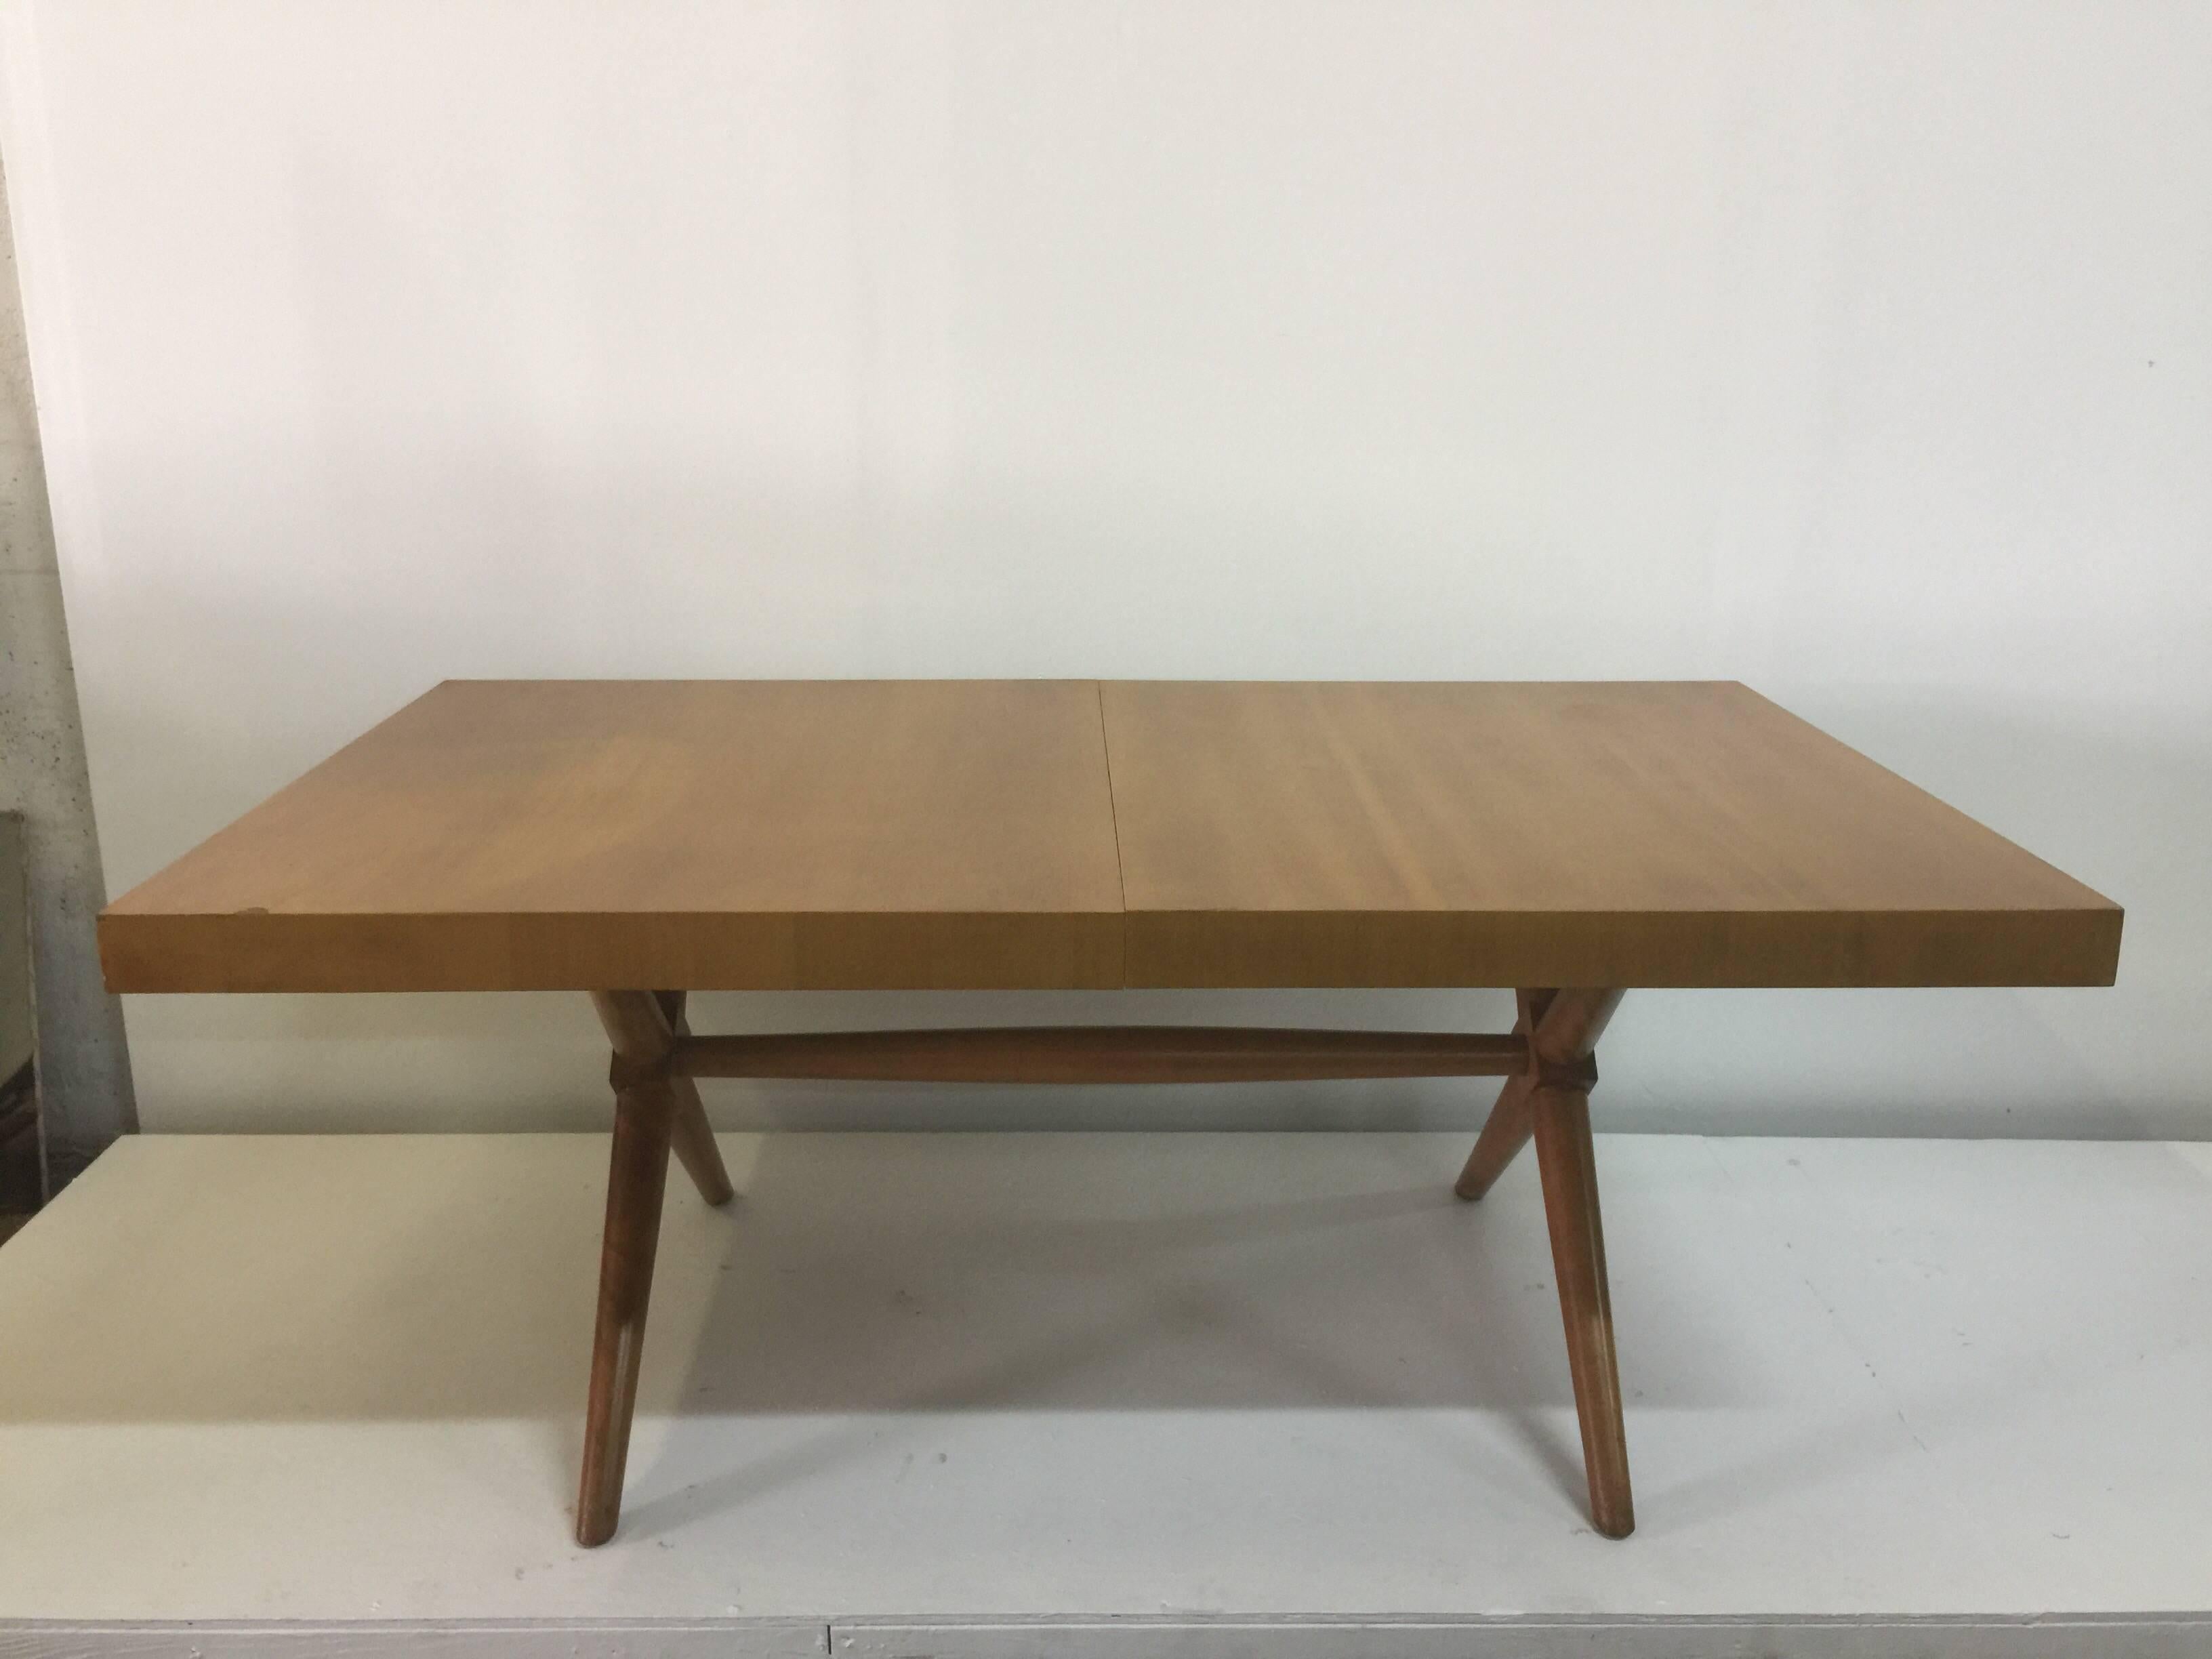 This iconic design by T.H. Robsjohn-Gibbings for Widdicomb is in wonderful original condition - some minor cosmetic issues. Blonde ash wood table may be restored and stained any color of choice for an additional cost (please inquire). 

As shown in